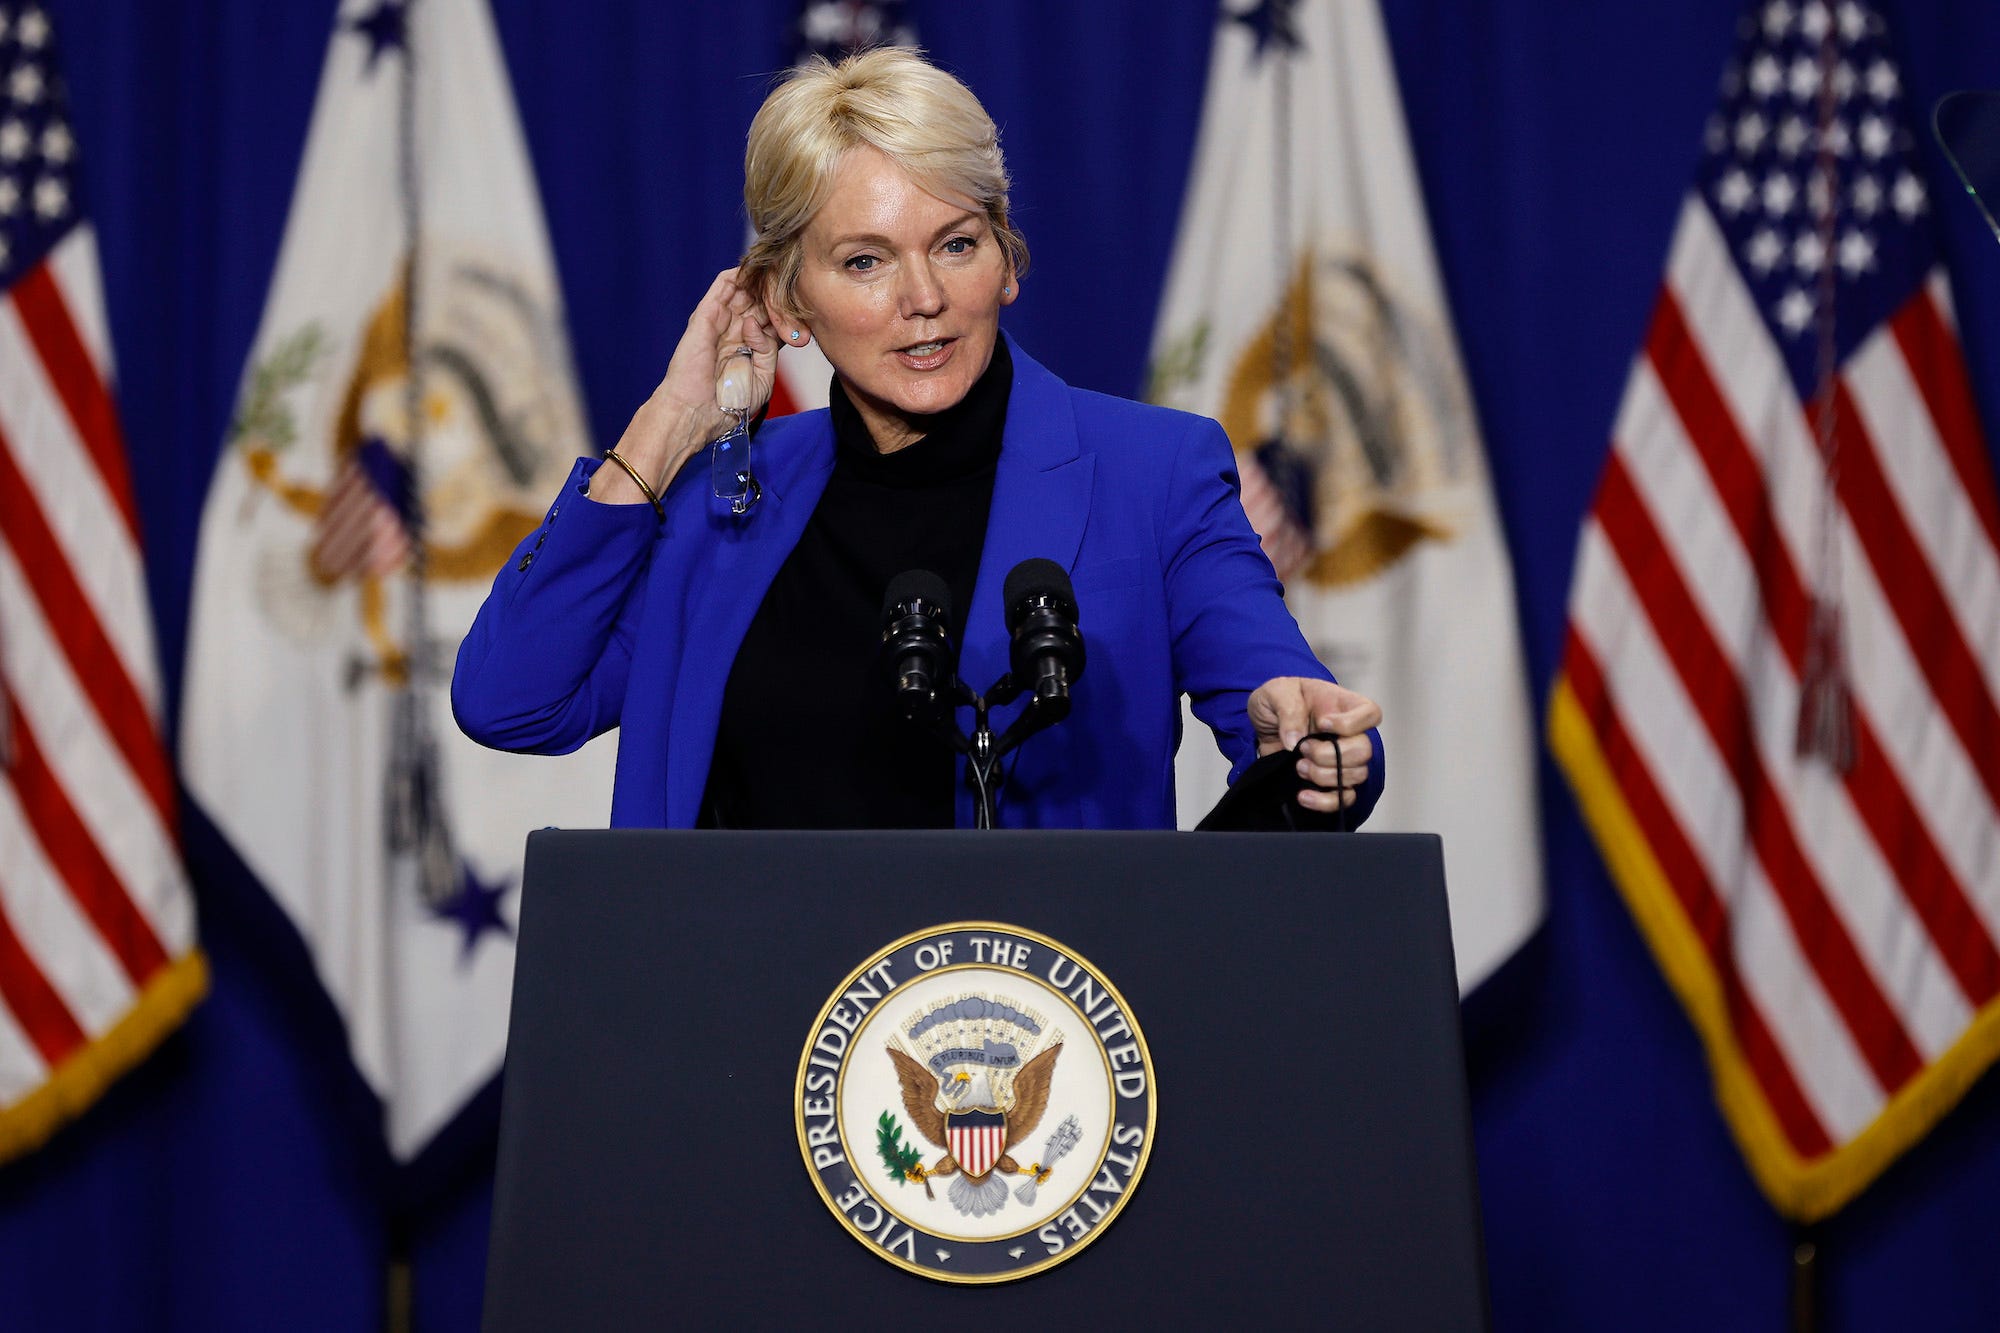 Energy Secretary Jennifer Granholm fixes her hair with right hand while standing against a backdrop of various flags at a Biden administration press conference.